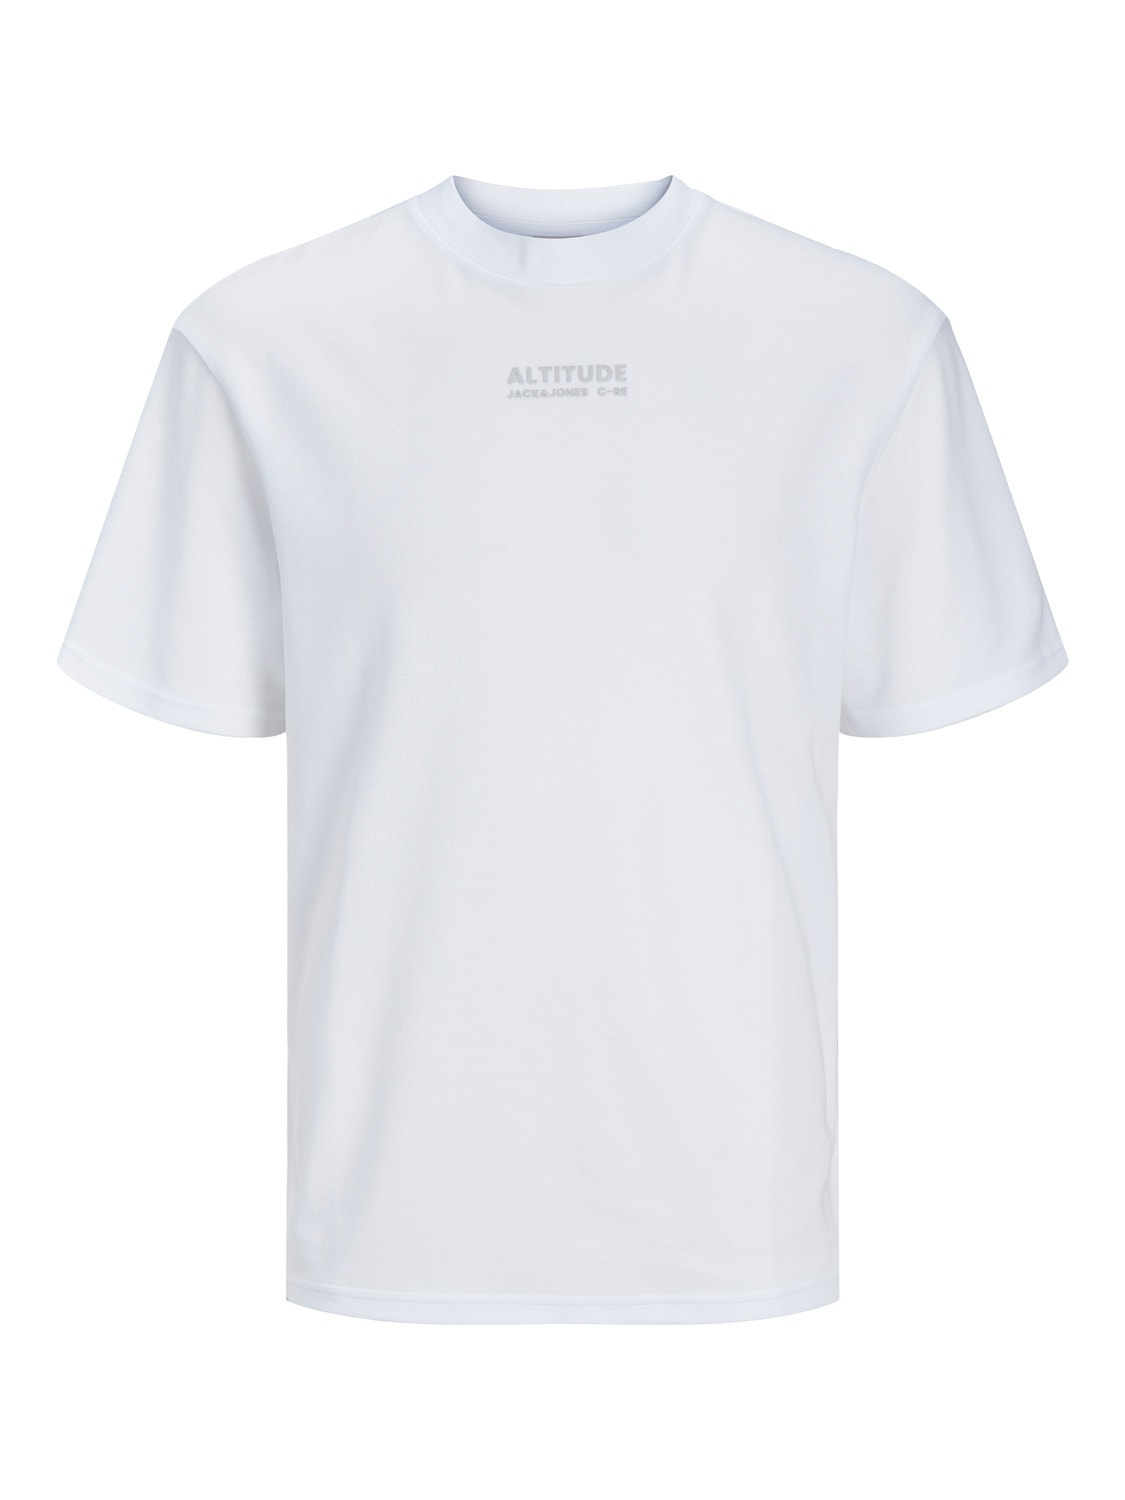 Jack & Jones Relaxed Fit Round Neck T-Shirt -White - 12254988